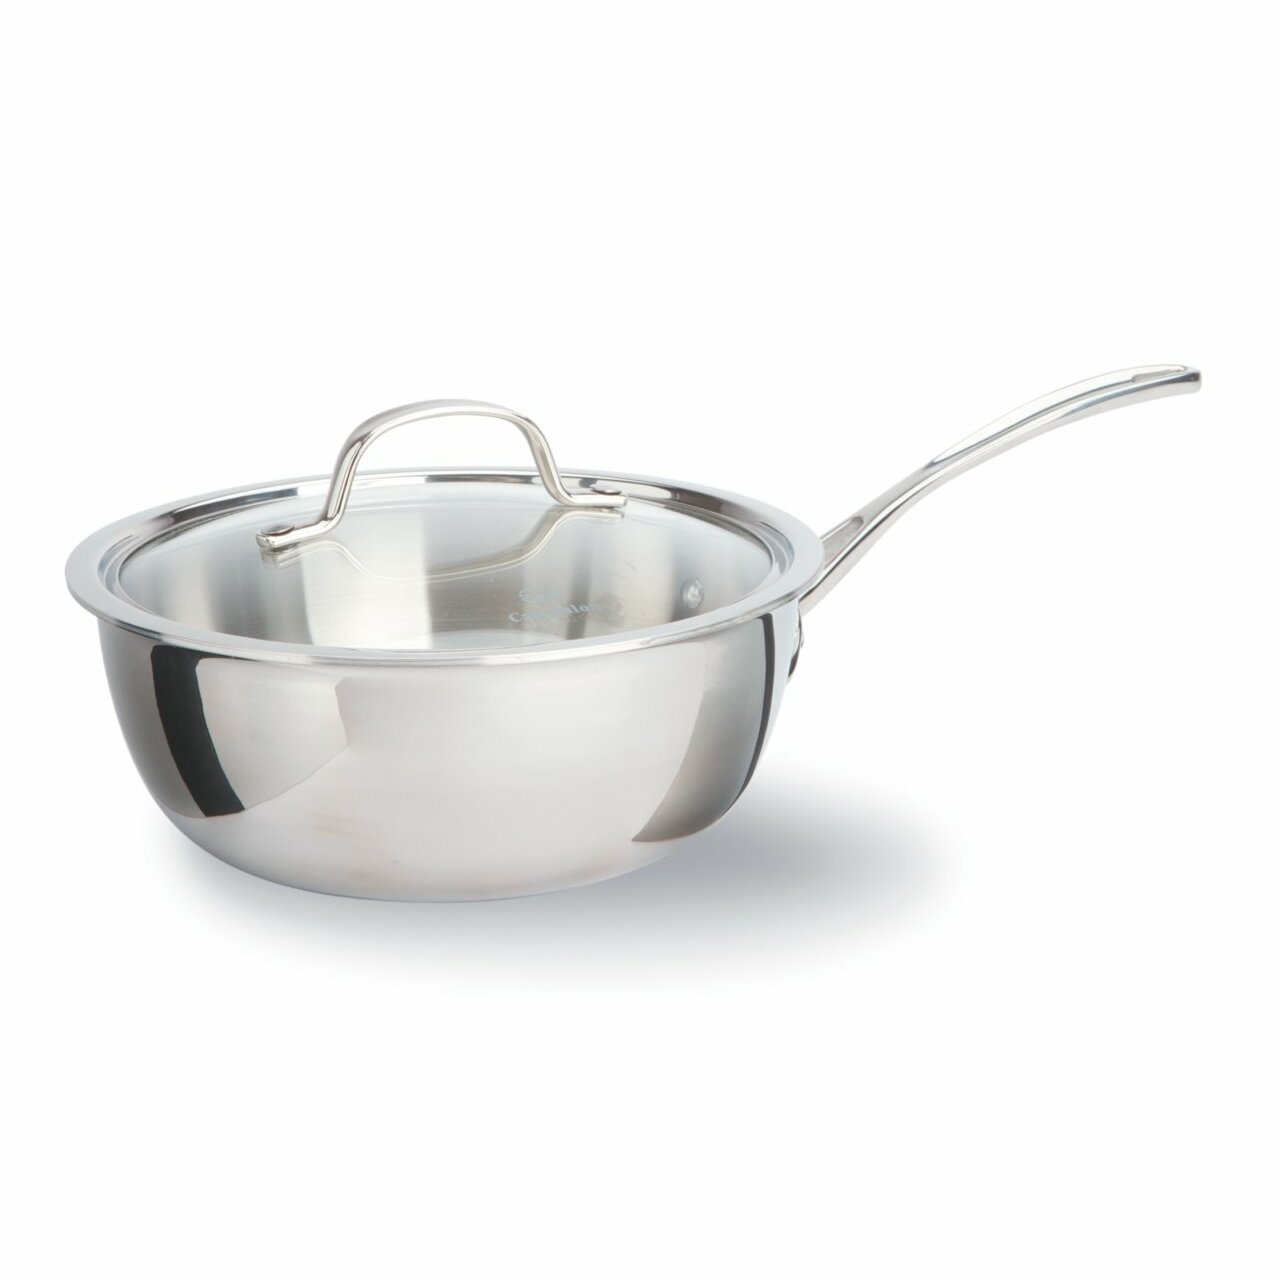 Calphalon Tri-Ply Stainless Steel 3-qt. Chef's Saute Pan with Lid Calphalon Stainless Steel 3 Qt Saucepan